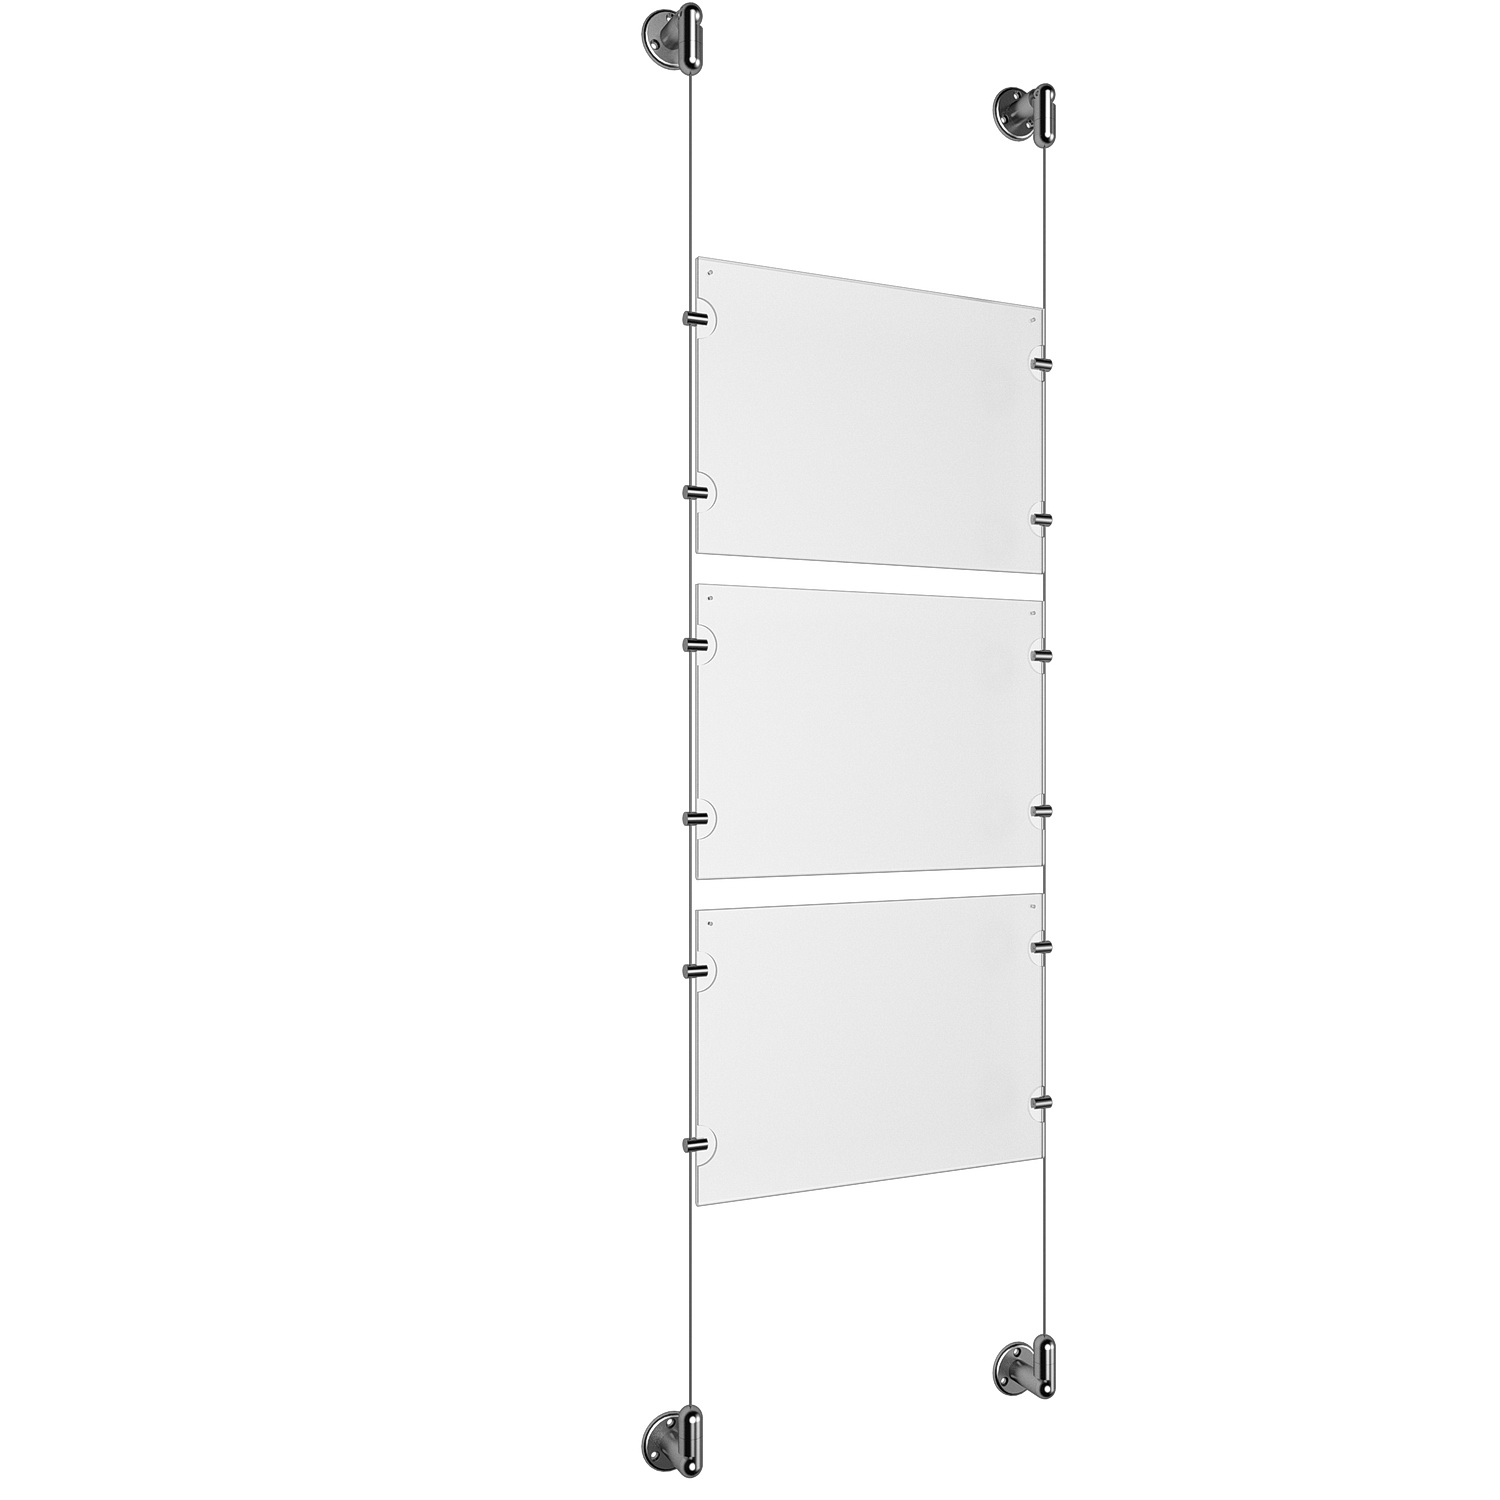 (3) 11'' Width x 8-1/2'' Height Clear Acrylic Frame & (2) Aluminum Clear Anodized Adjustable Angle Cable Systems with (12) Single-Sided Panel Grippers